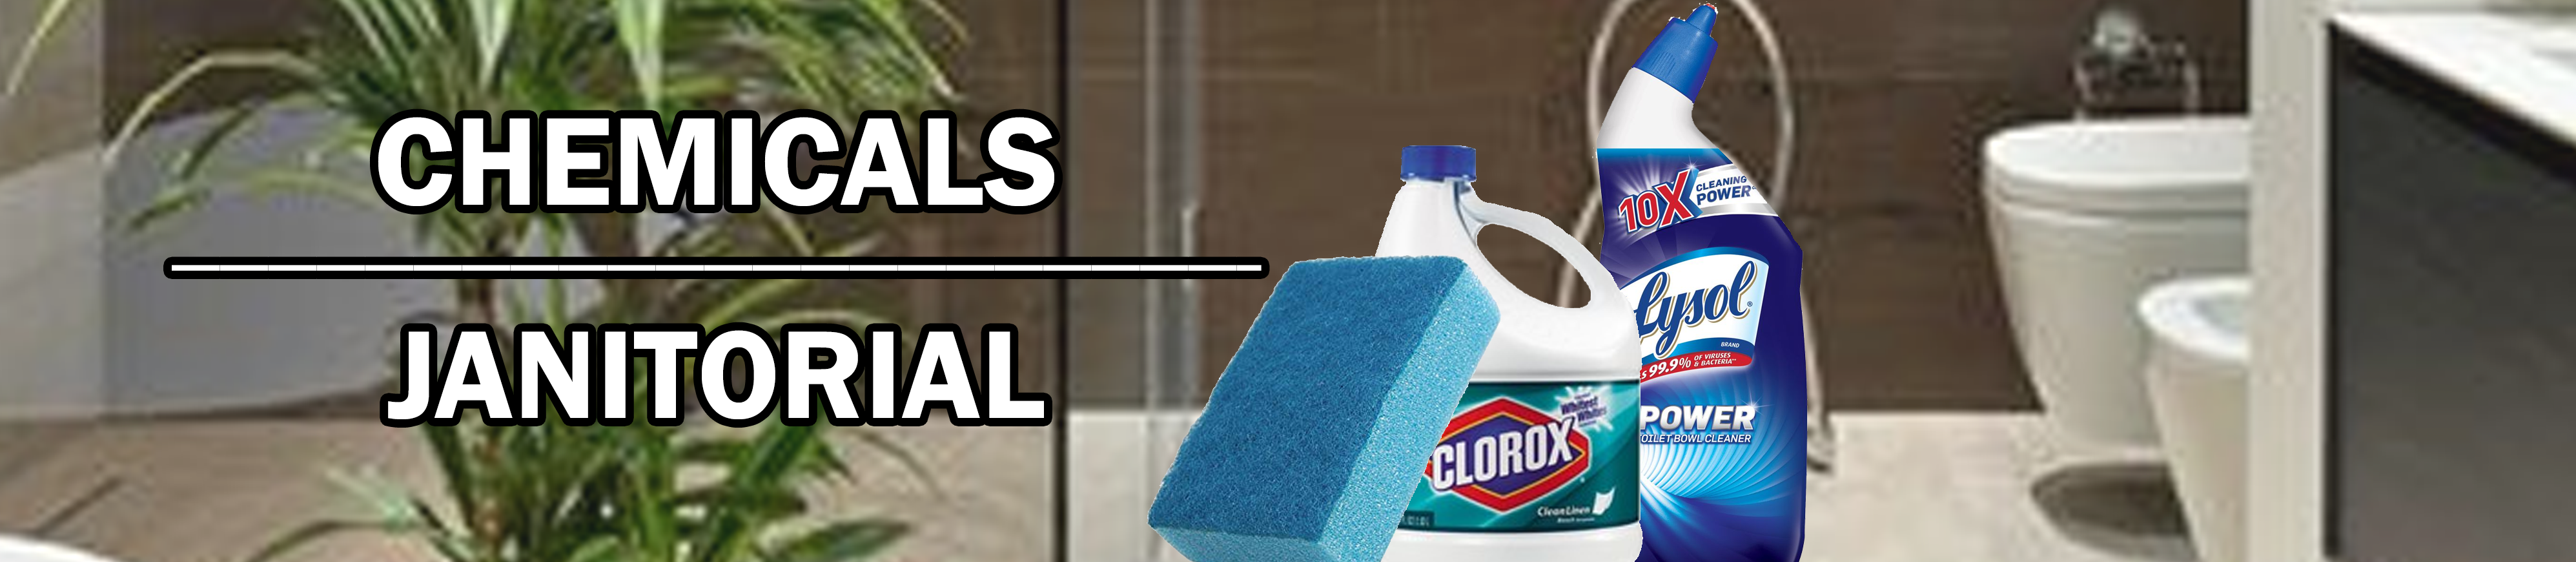 Chemicals/Janitorial at Clean Choice.